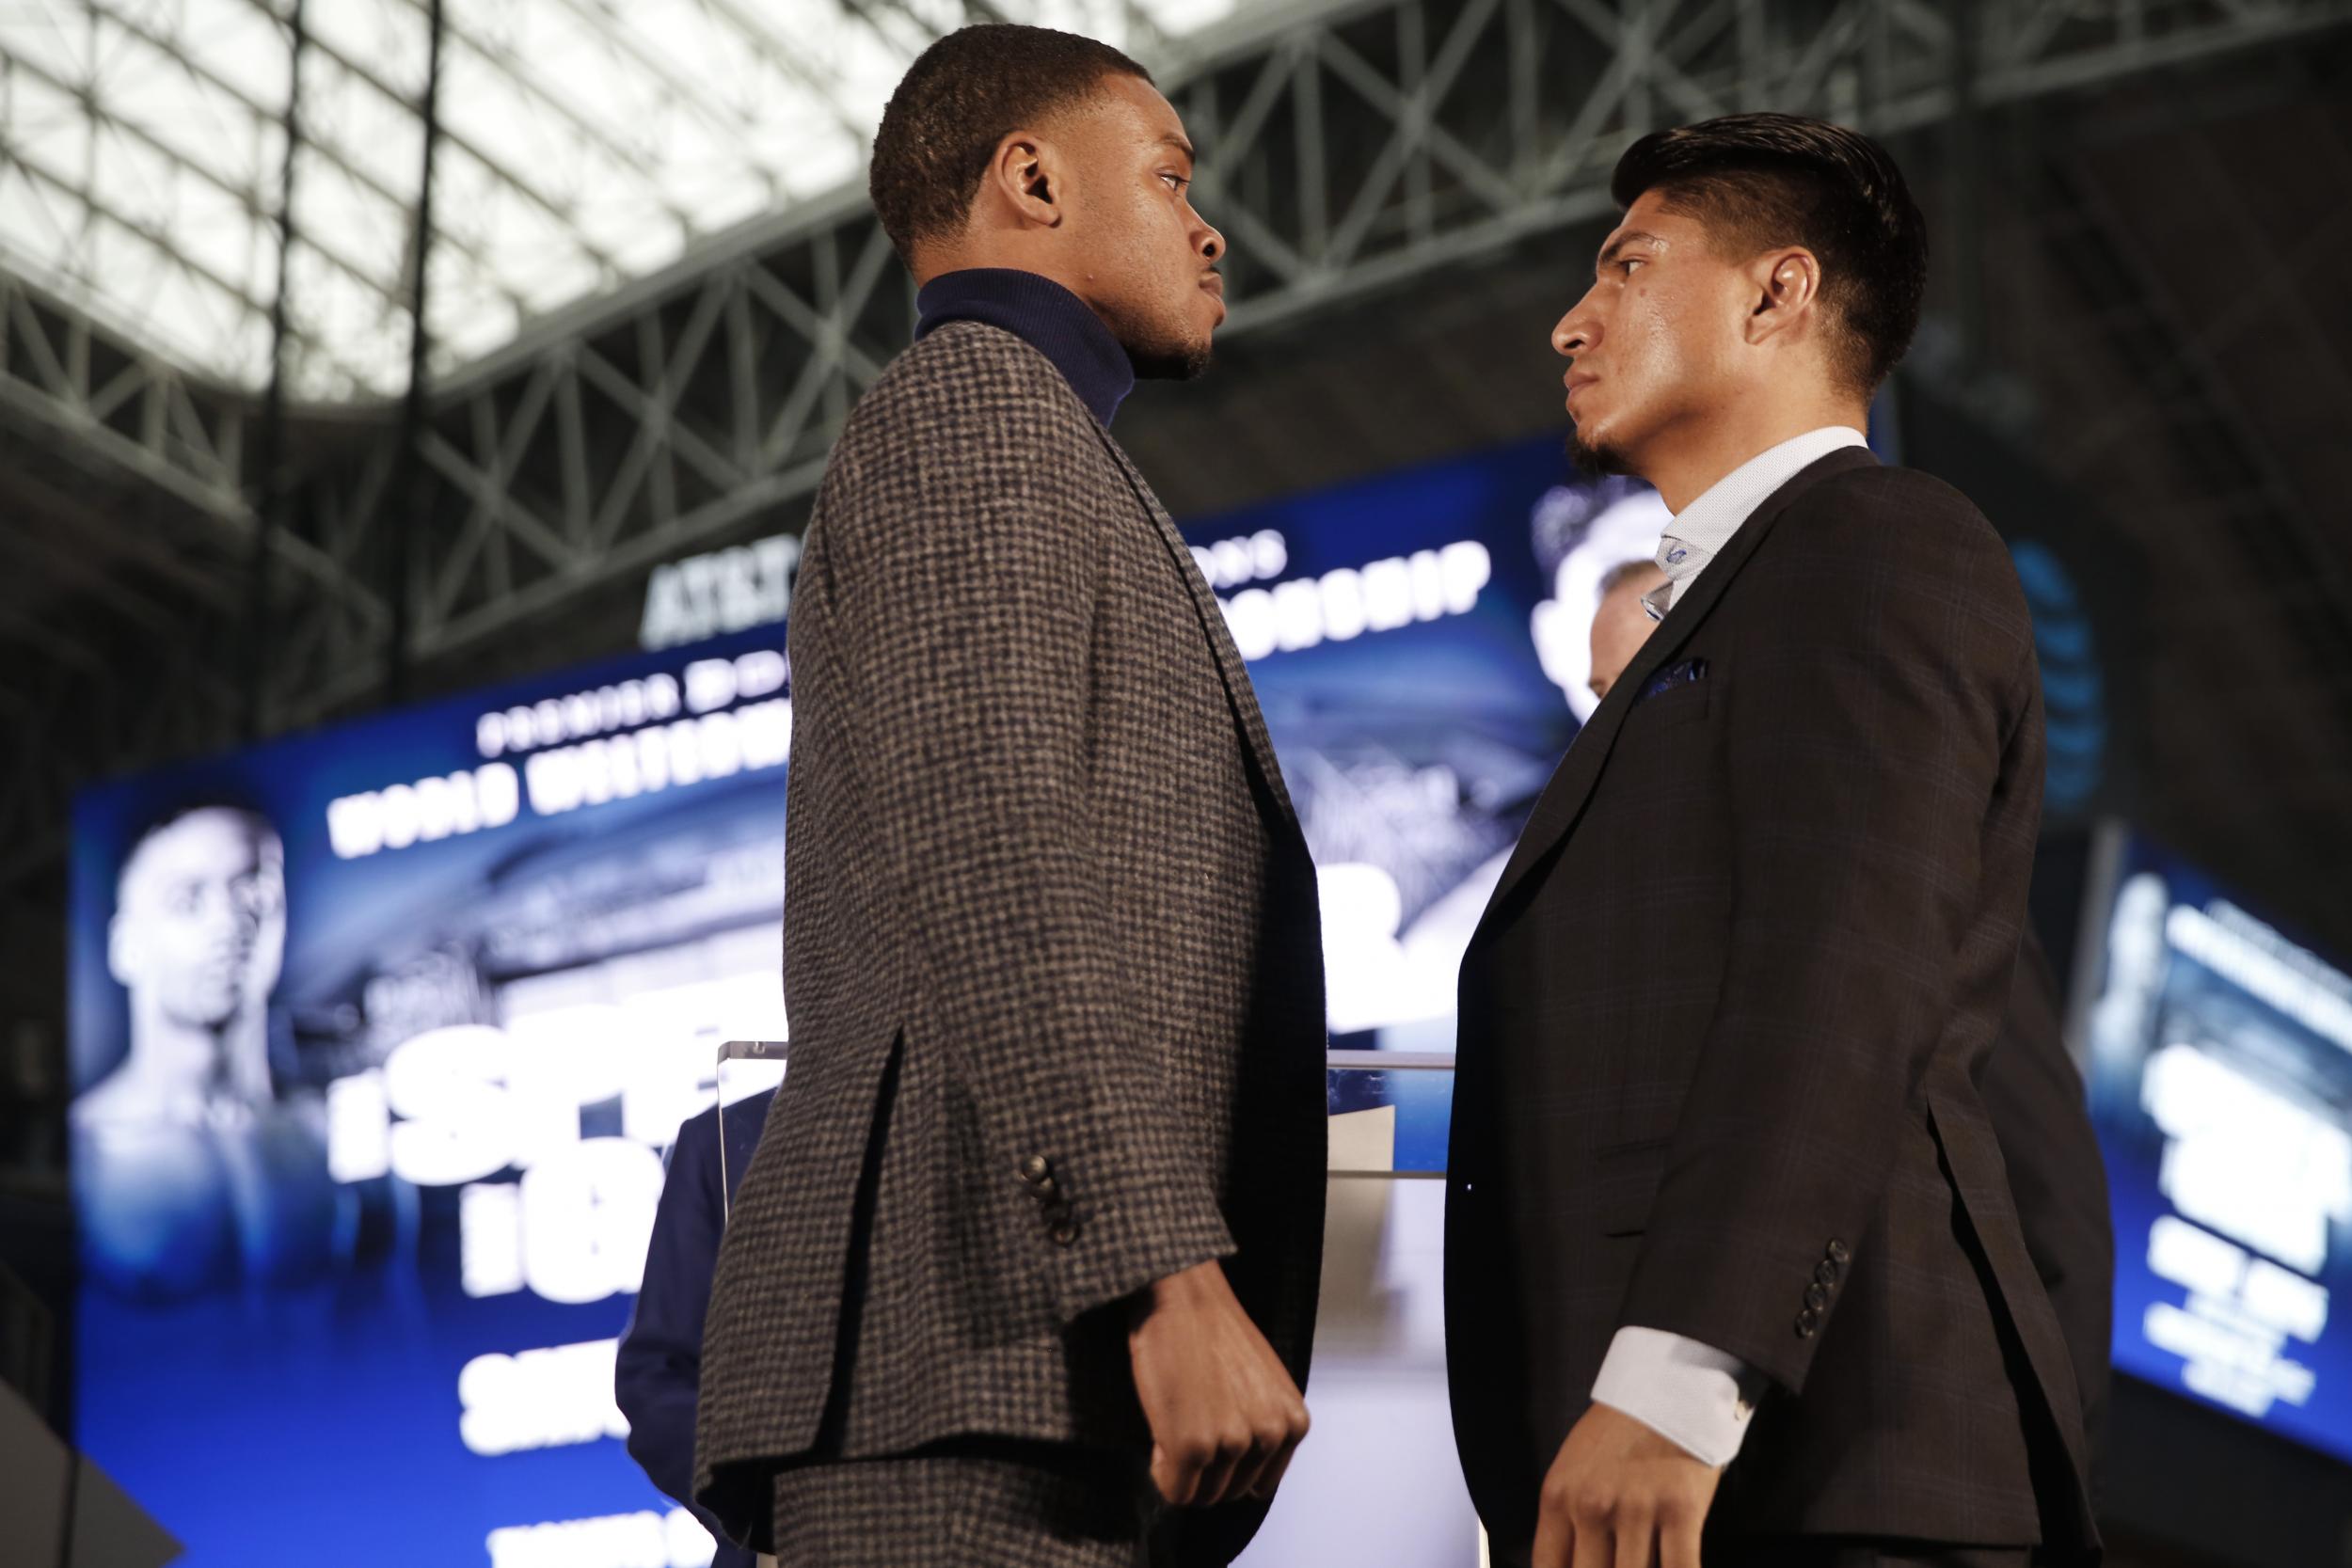 Spence and Garcia face off during press tour